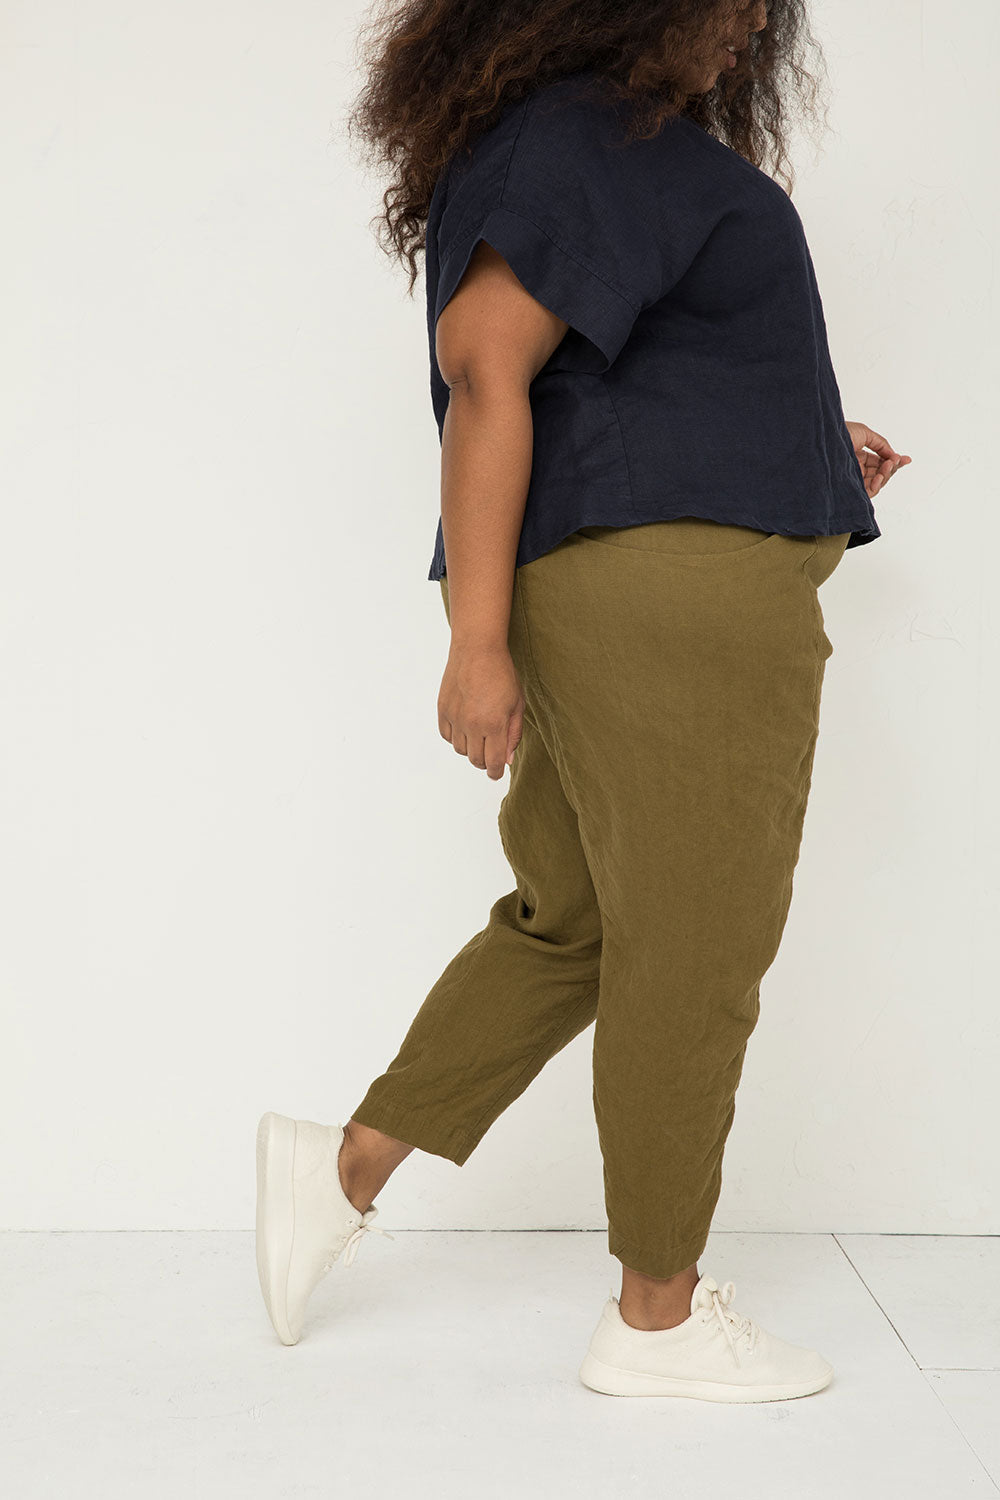 Clyde Work Pant in Midweight Linen Olive#color_olive